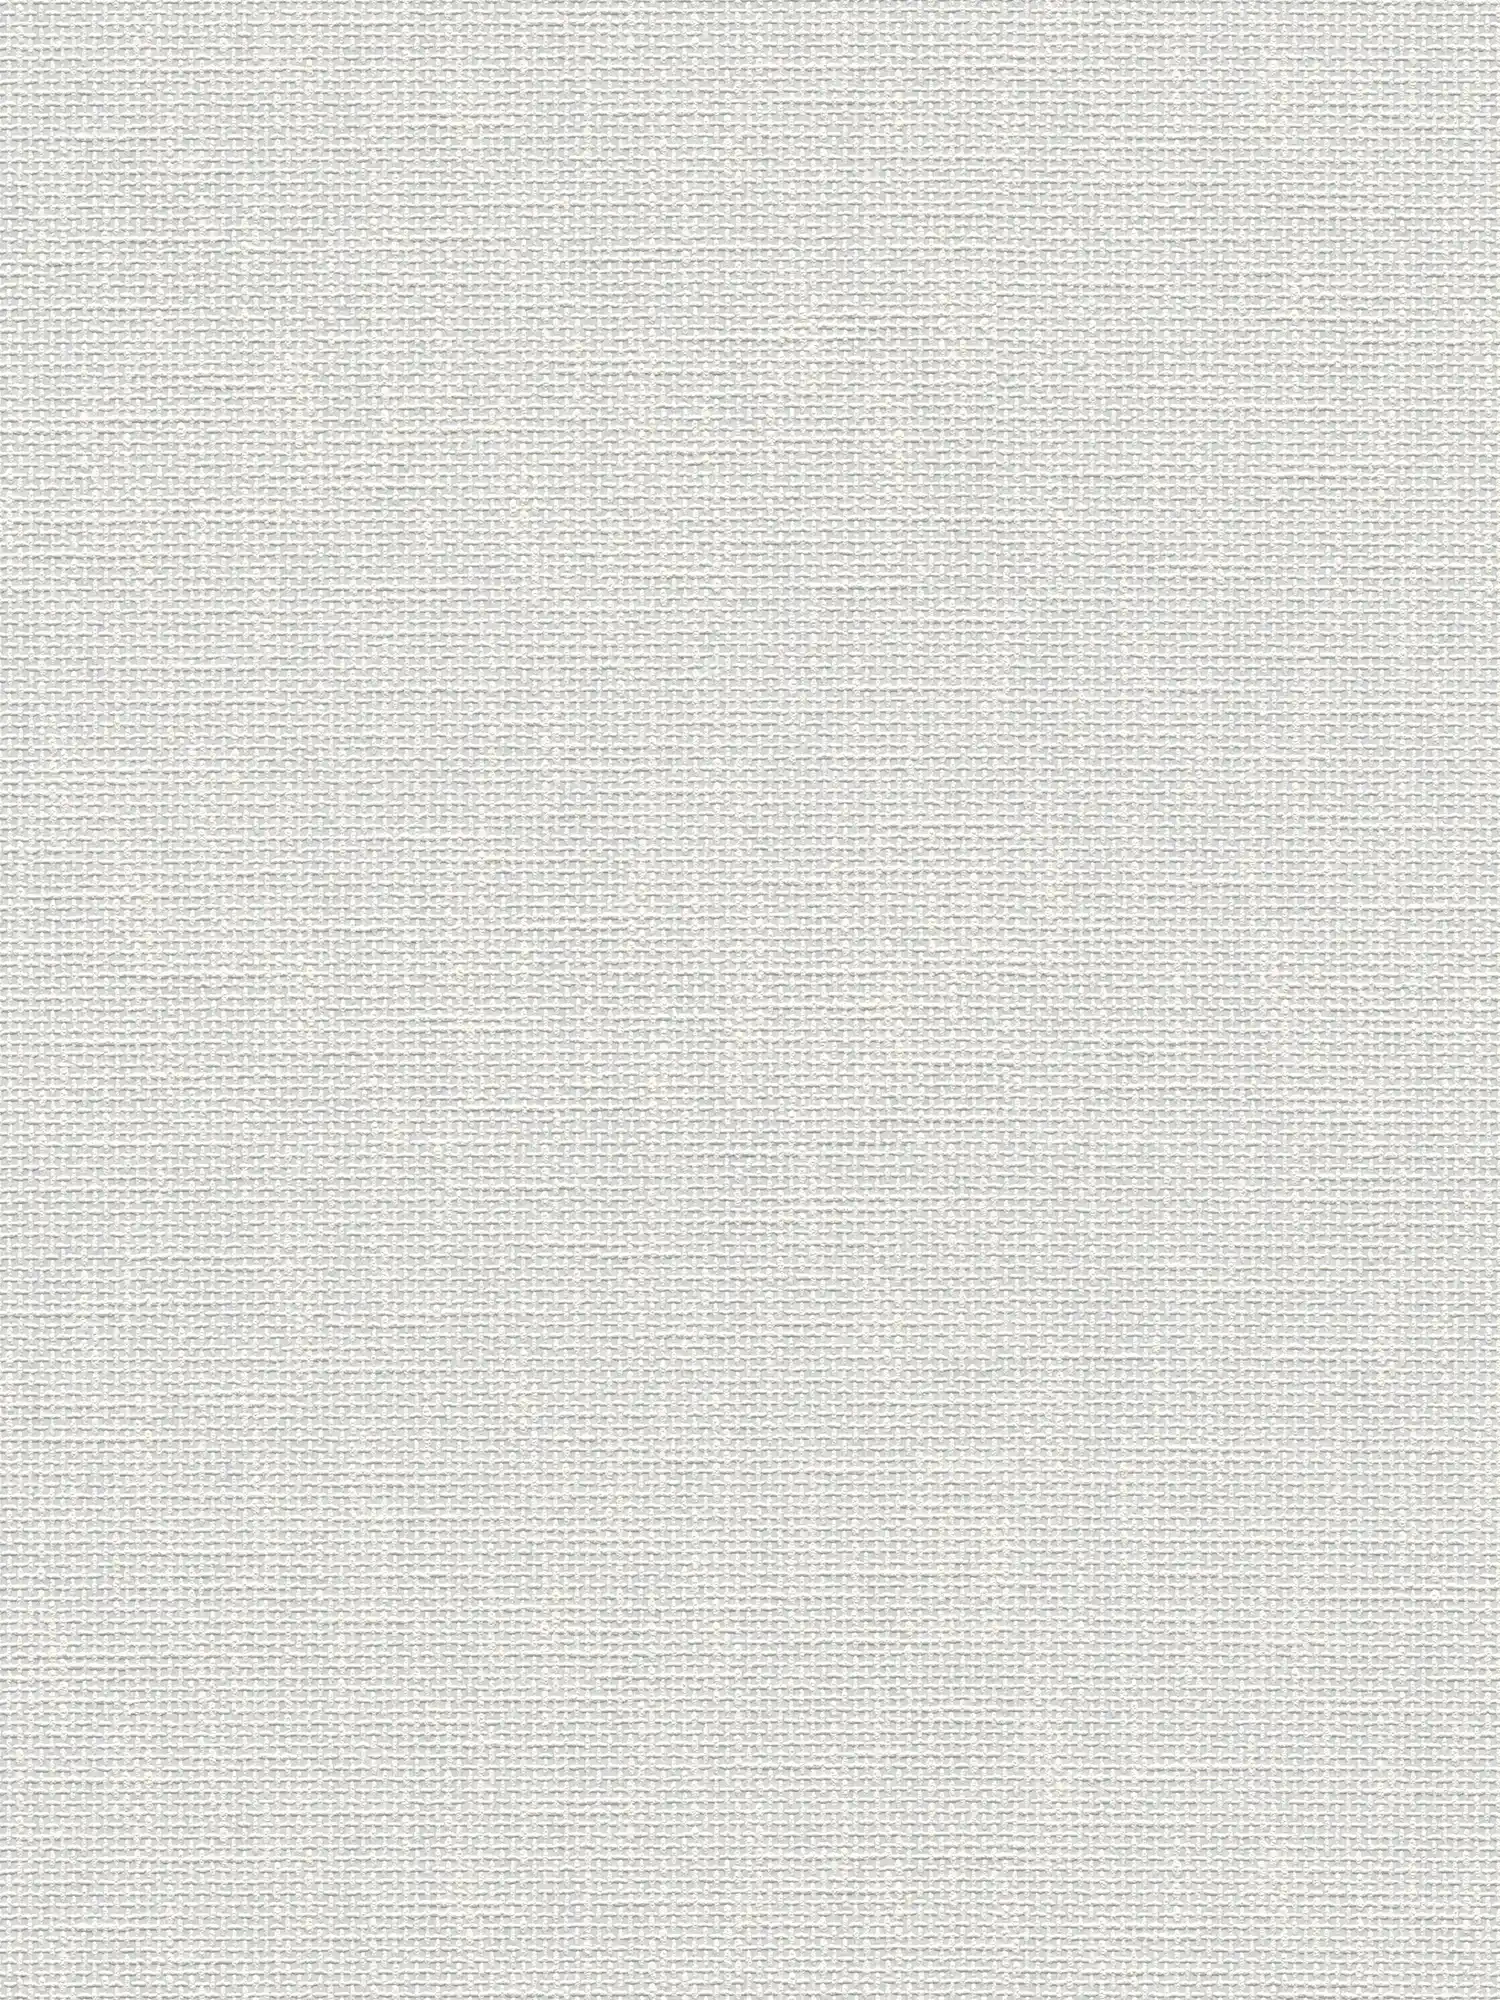 Paintable wallpaper fabric texture & textile look - white
